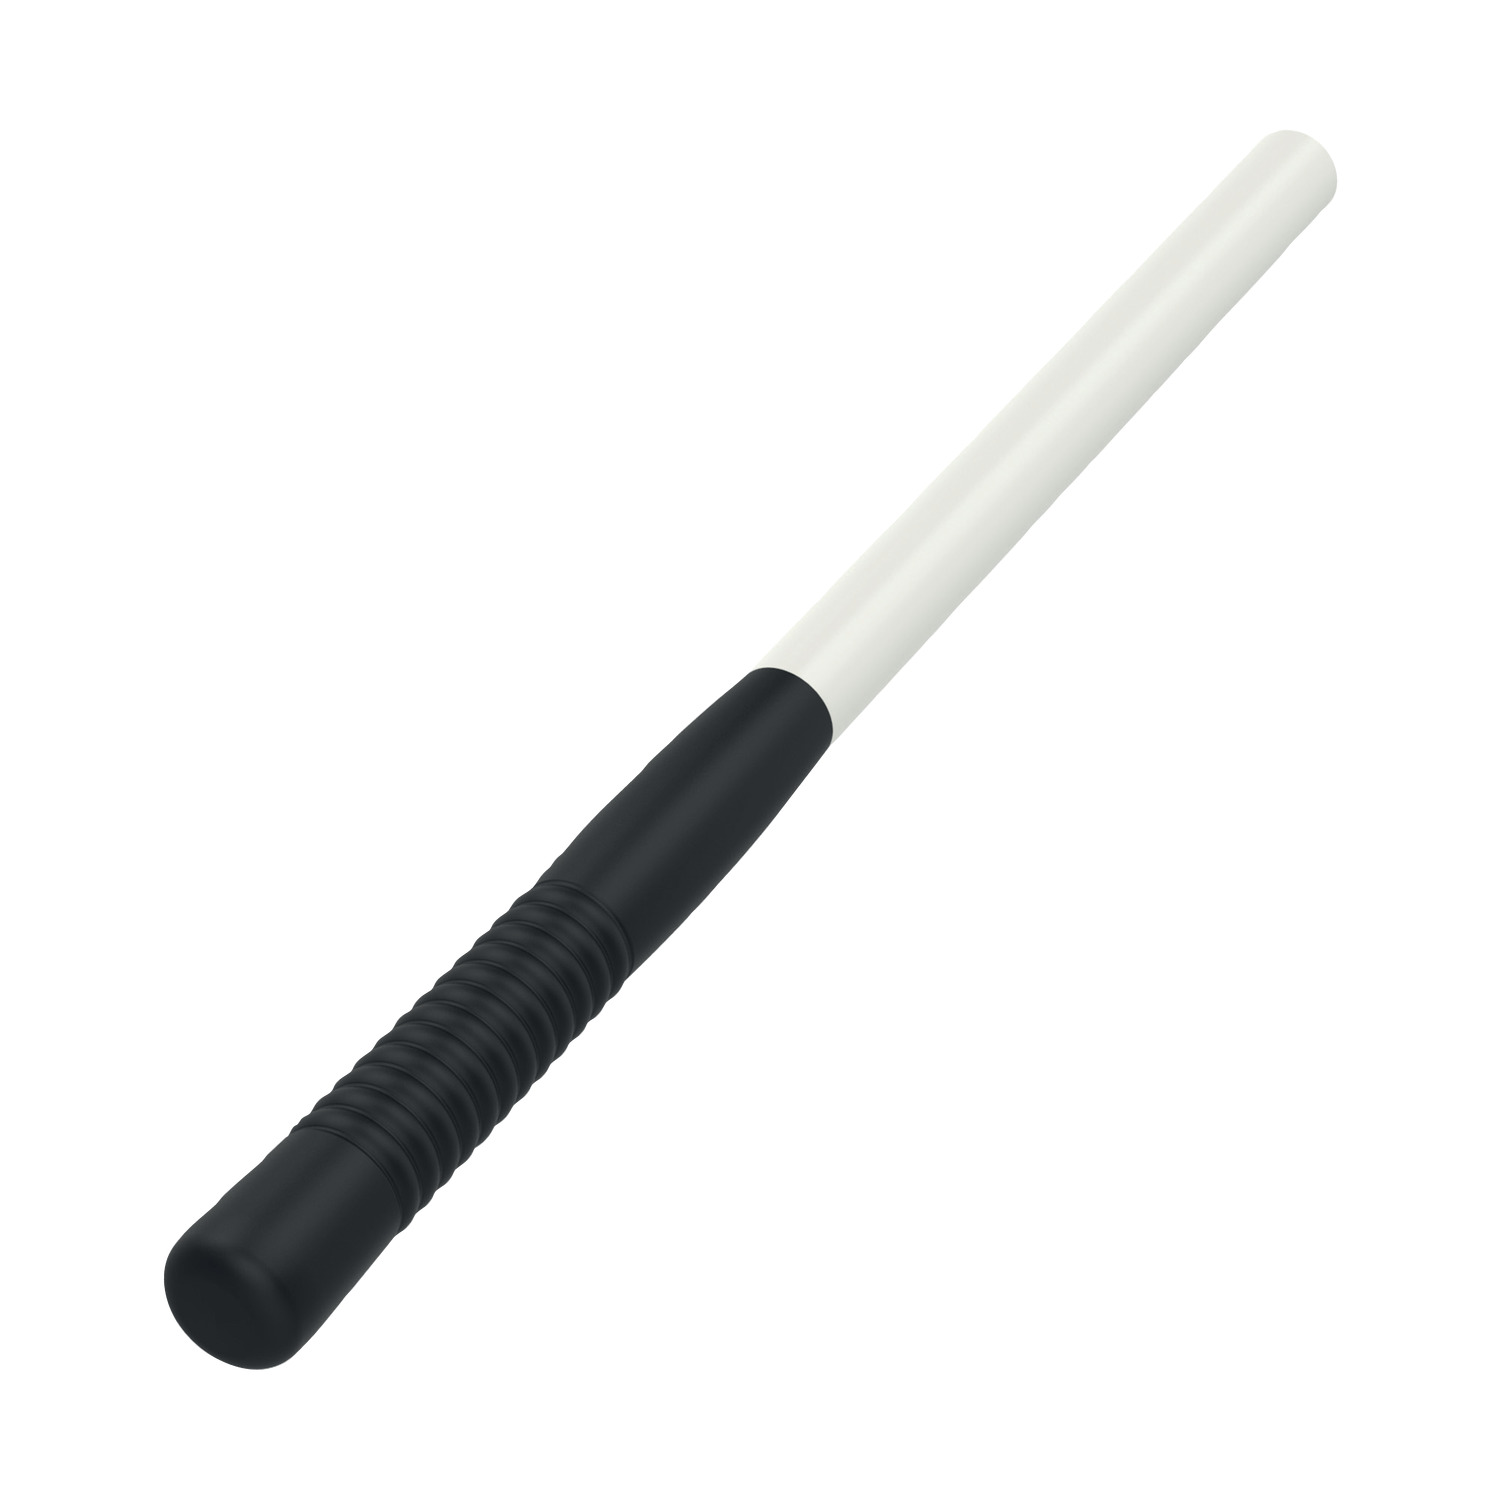 98223 Handle - for Simplex Sledge Hammers